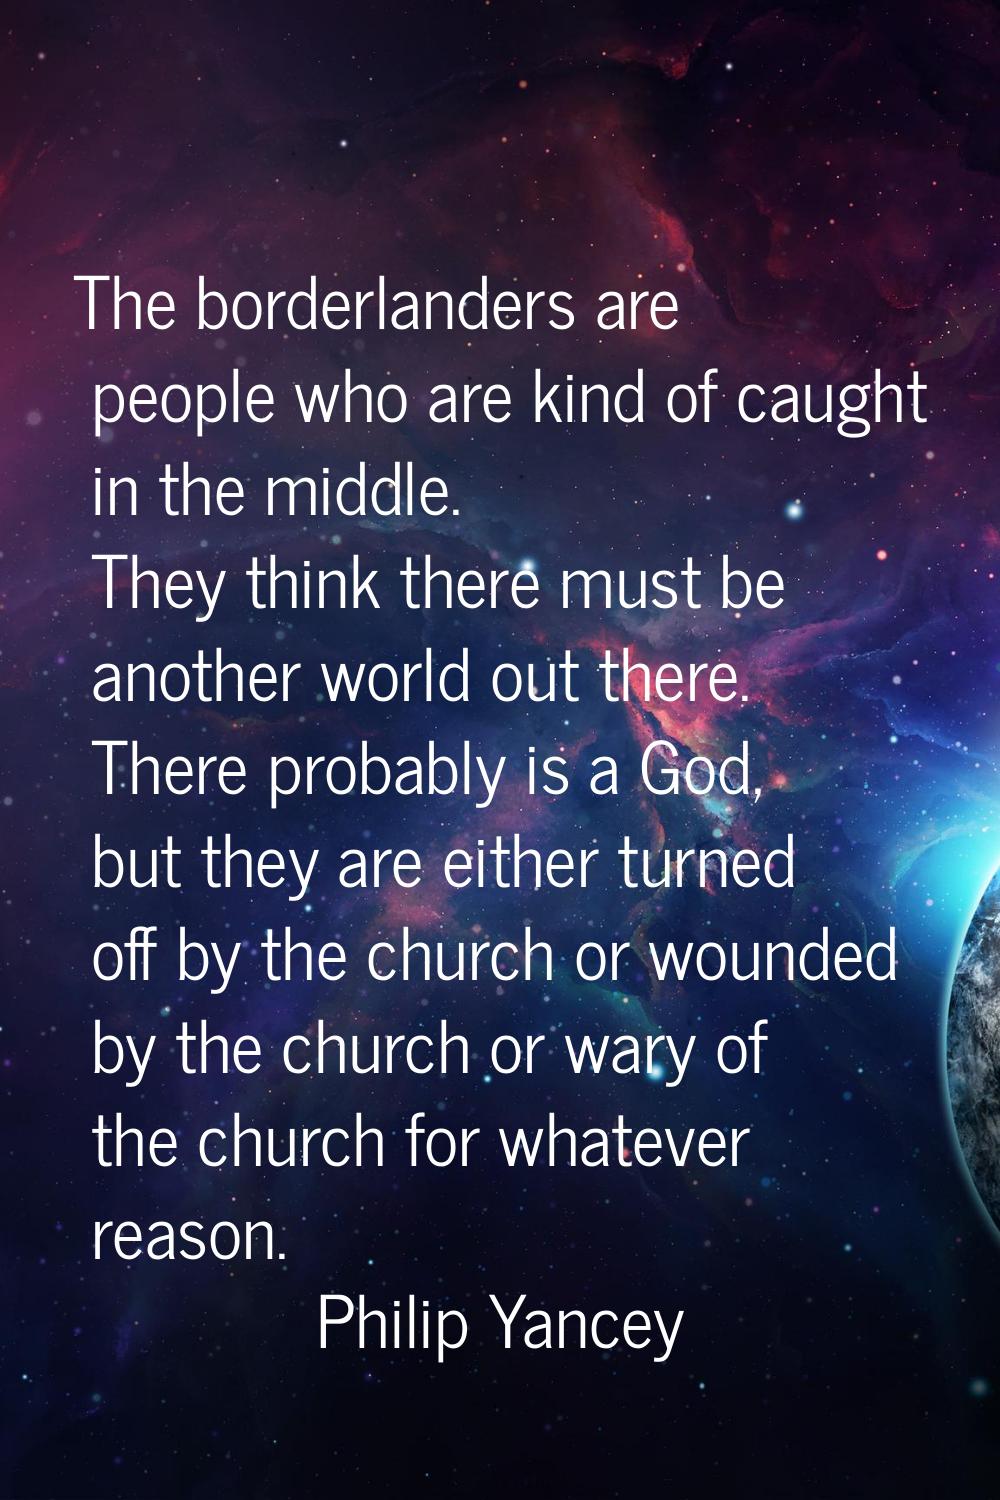 The borderlanders are people who are kind of caught in the middle. They think there must be another